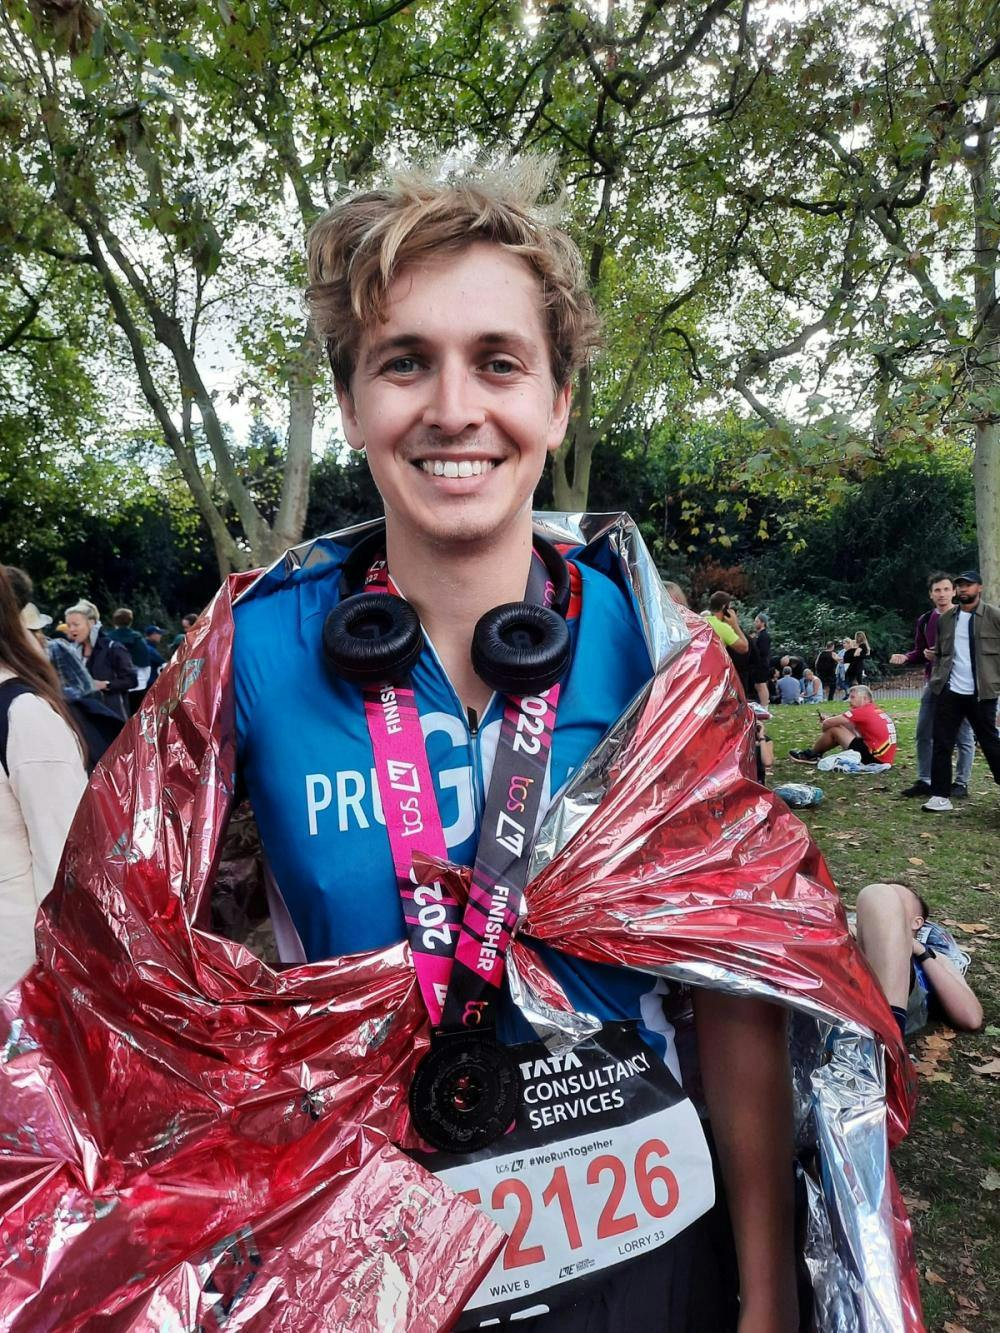 Fred smiling wearing a medal and foil blanket in running clothes